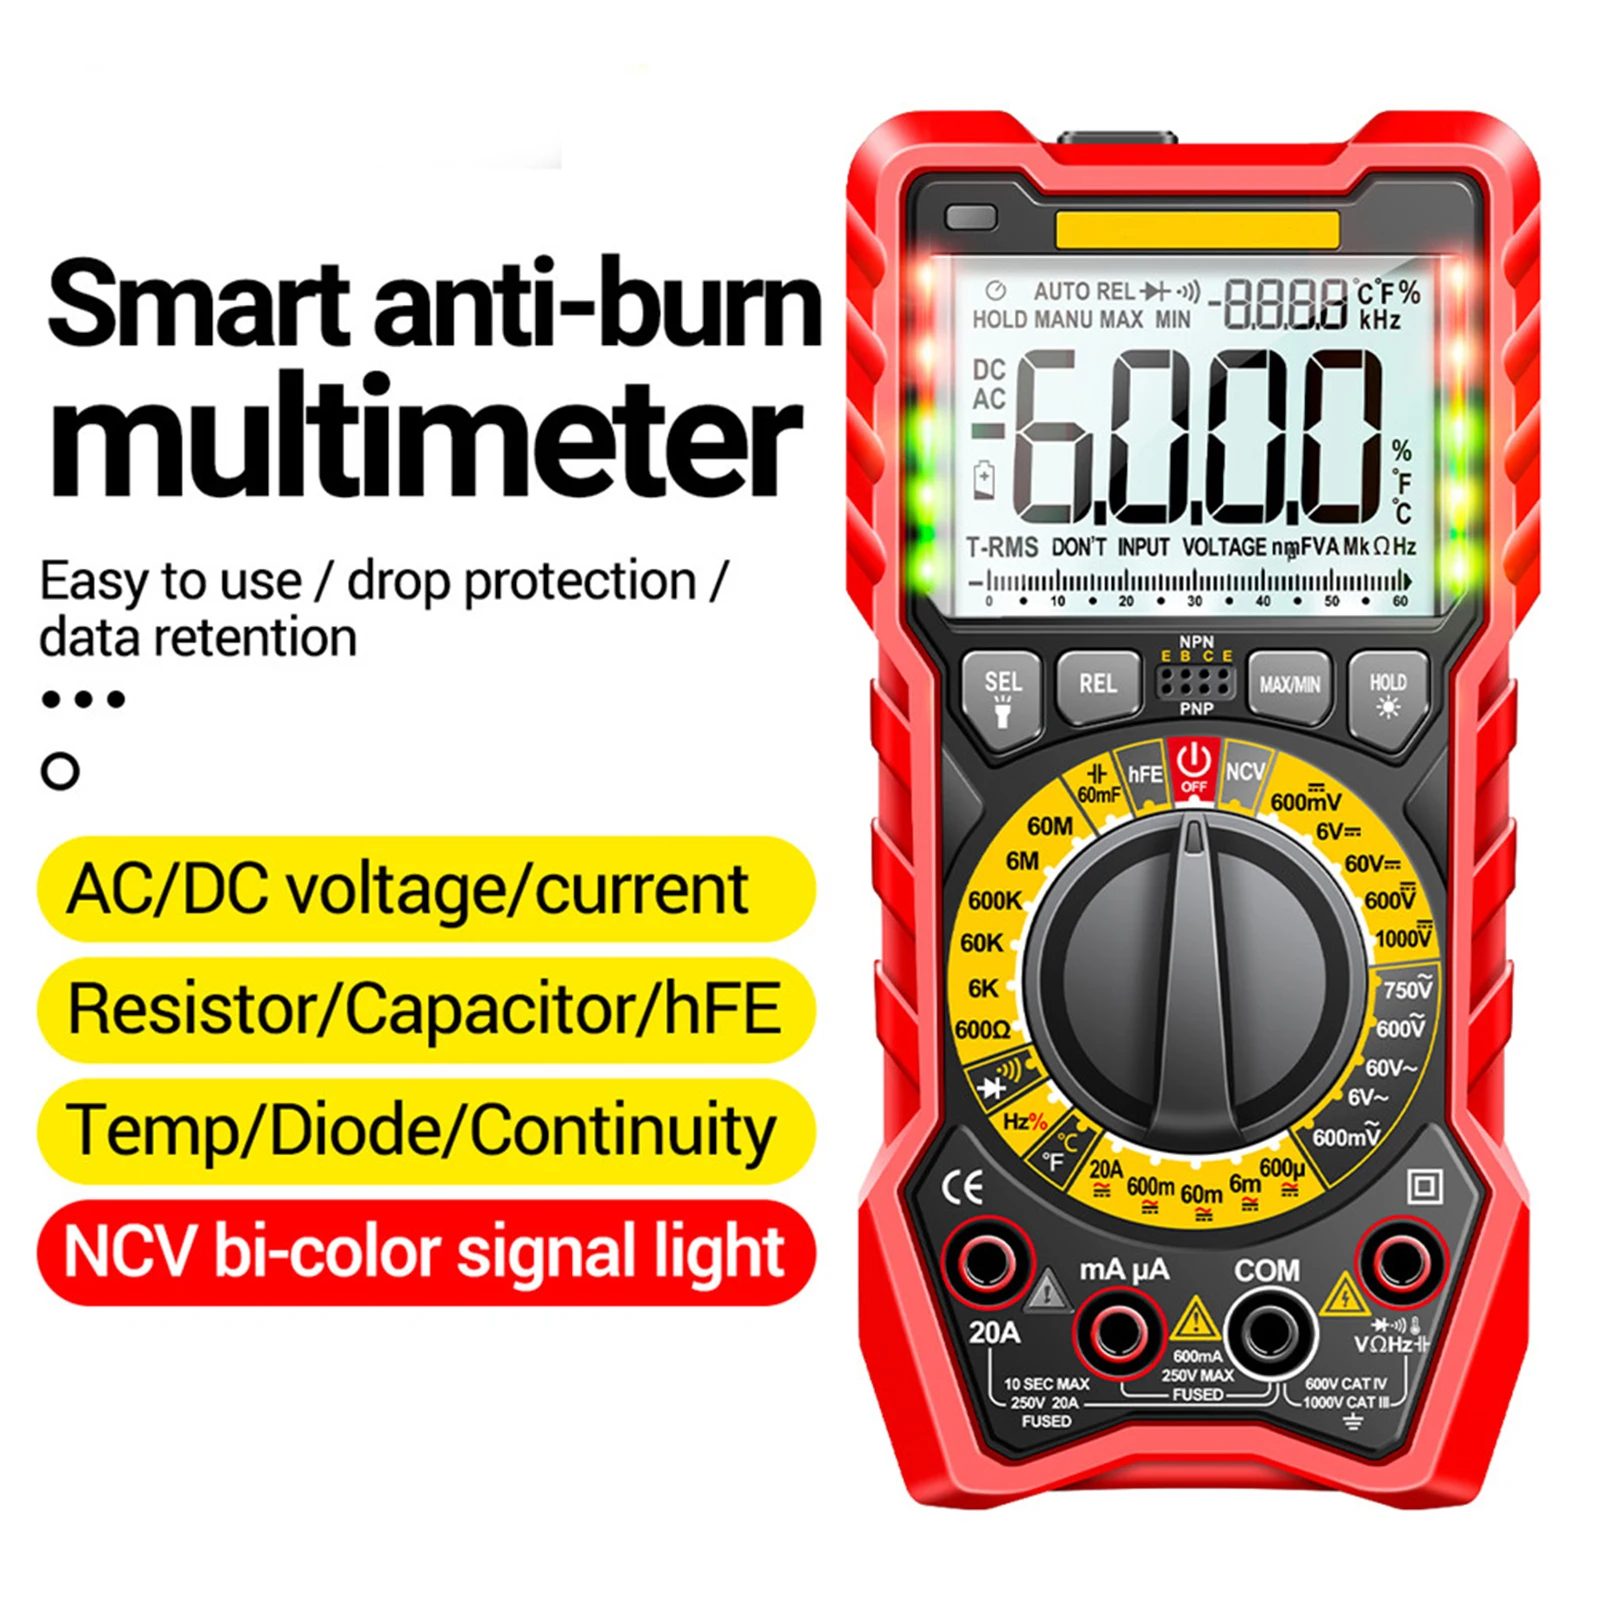 

Digital Multimeter 6000 Counts Ammeter with LCD Display Backlight DC/AC Profissional Tester LCR Meter